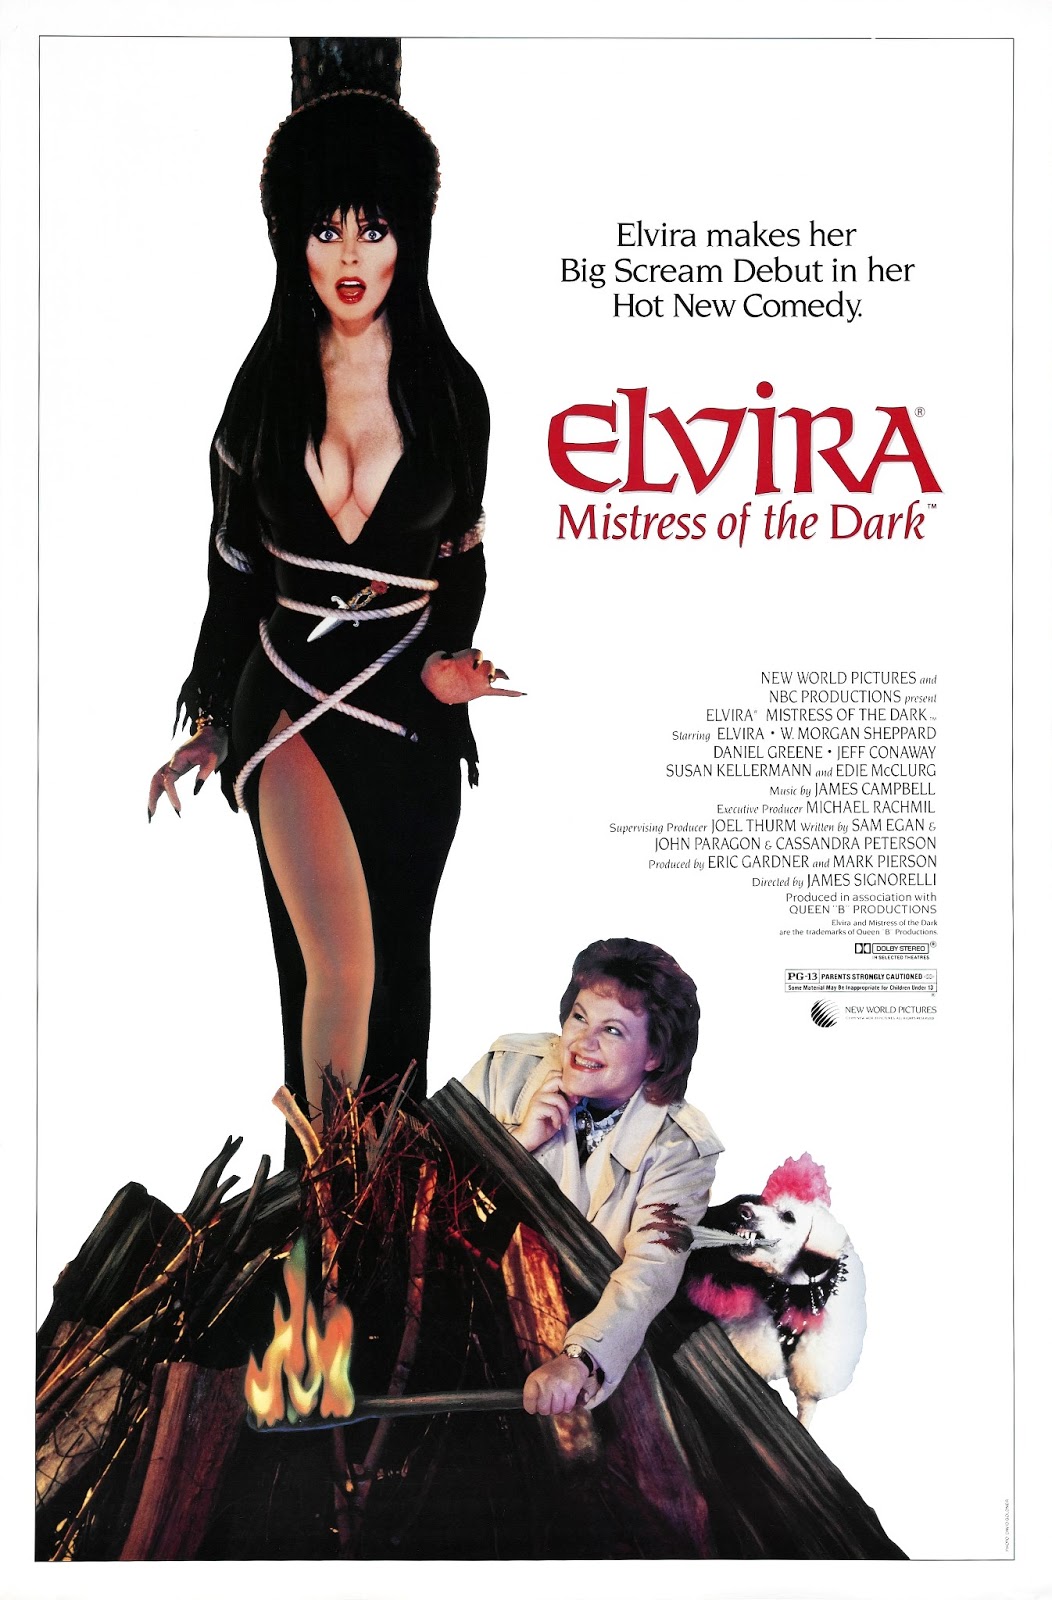 Elvira Grey Fable Porn - Hubbs Movie Reviews: March 2013